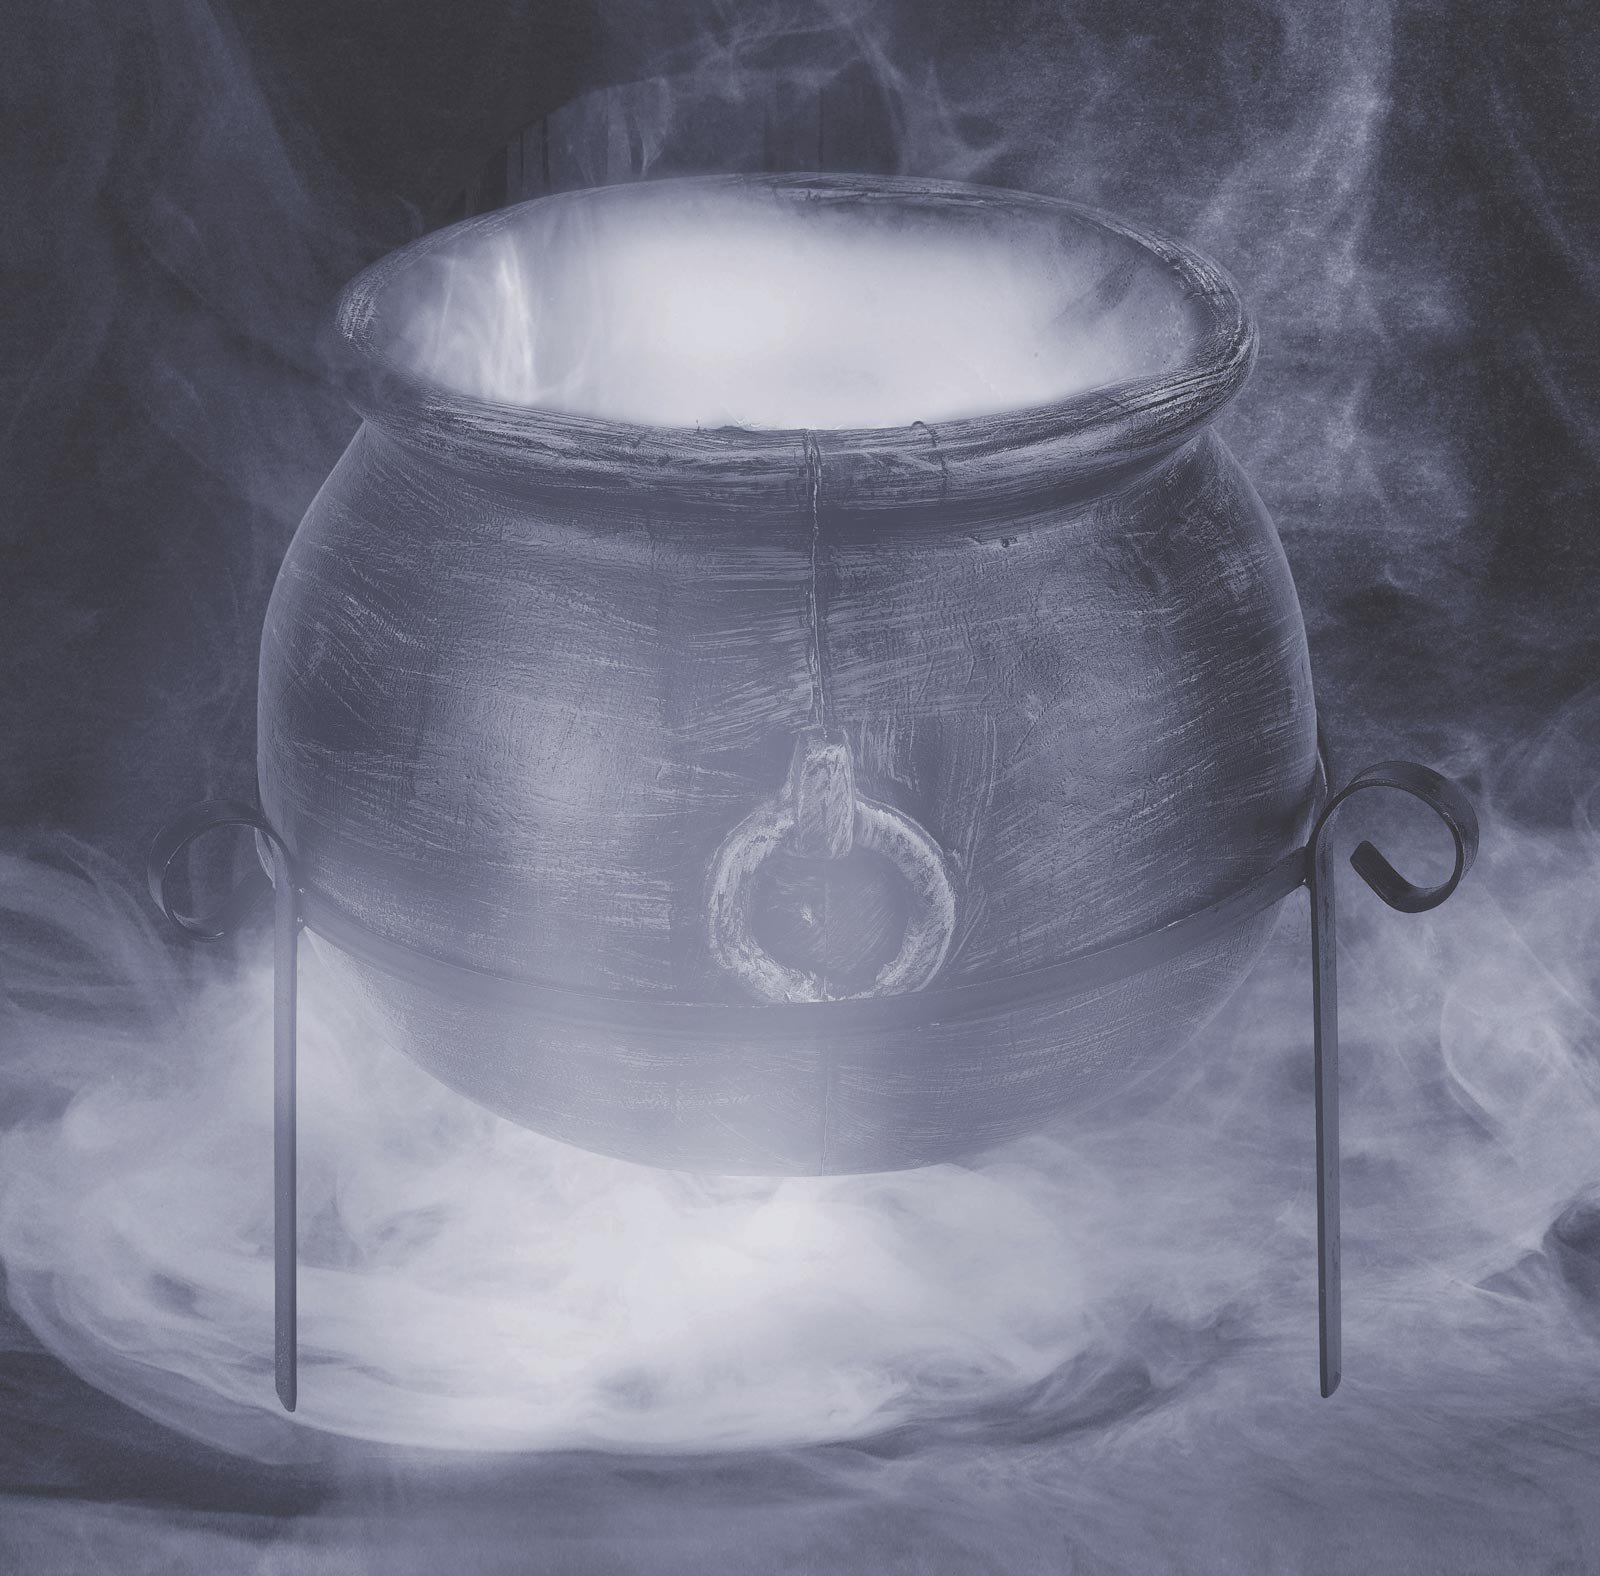 The Witches Cauldron - Witchcraft Photo (1119346) - Fanpop